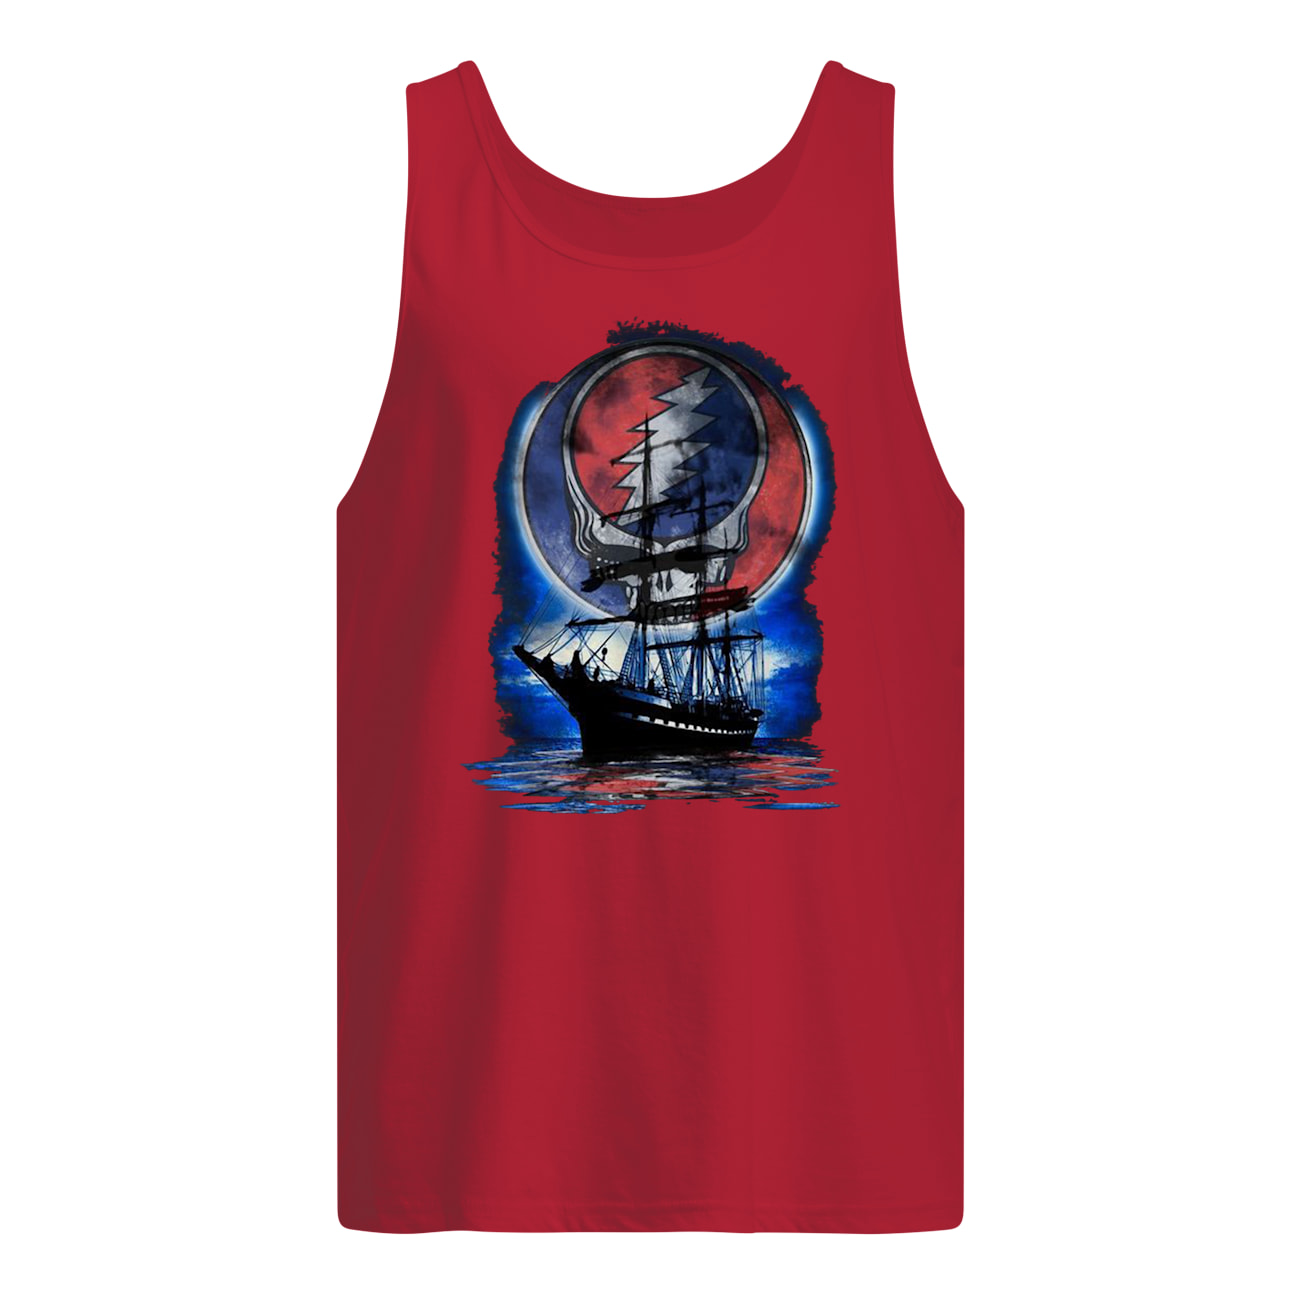 Steal your face moon boat live beyond limits quote relaxing tank top